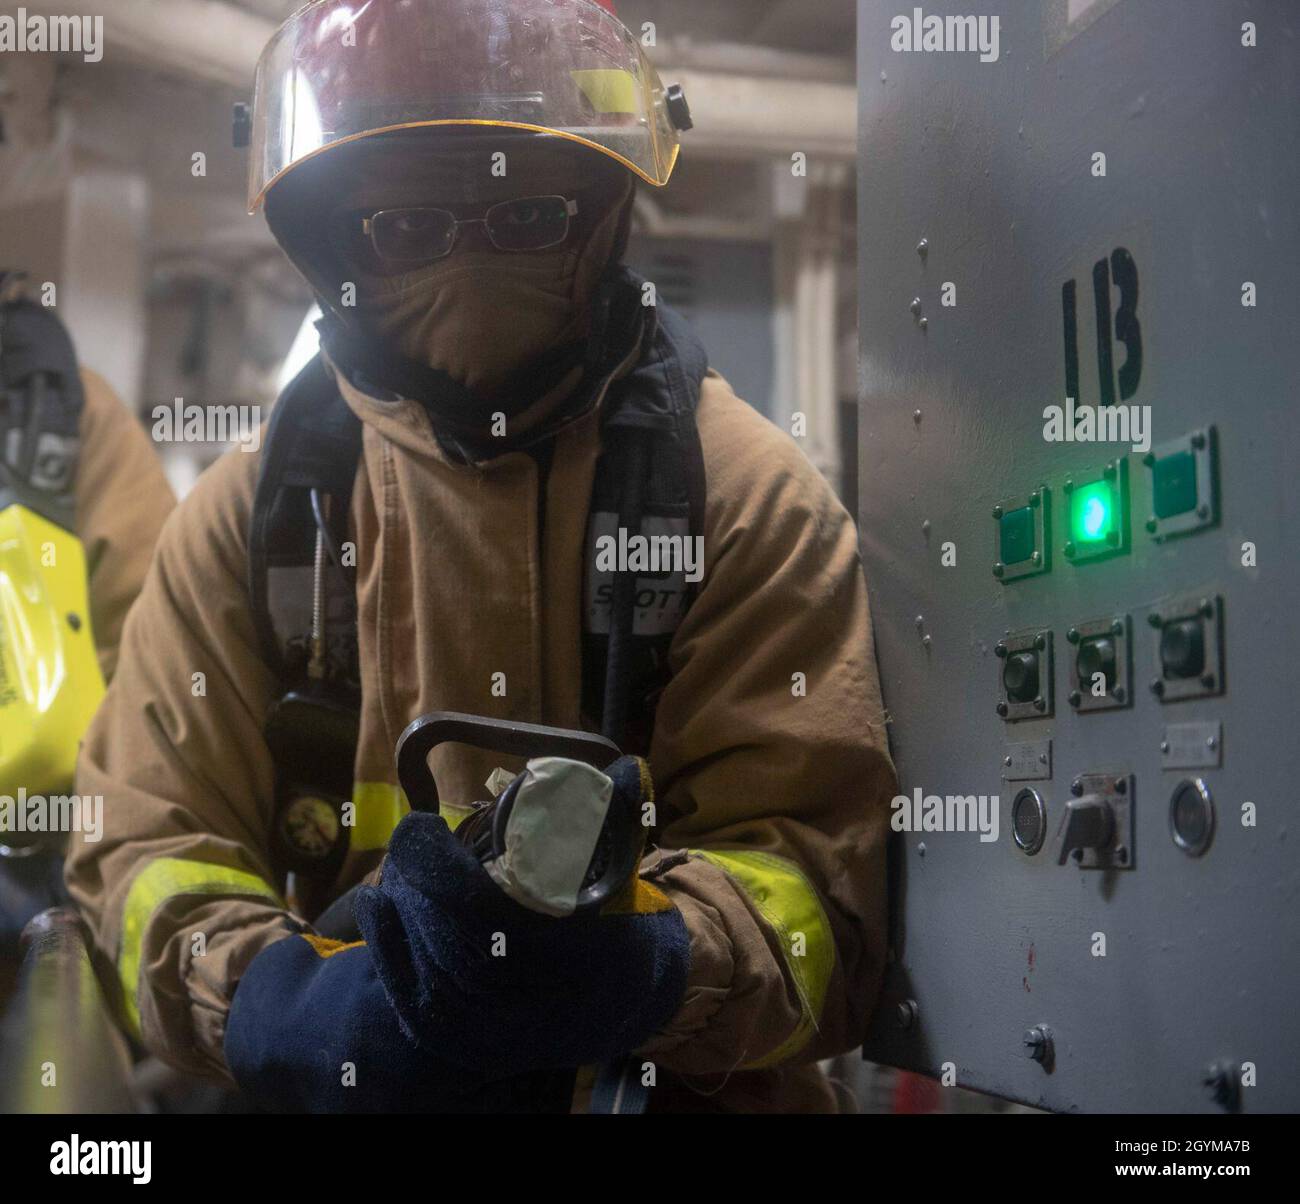 PACIFIC OCEAN (Jan. 29, 2020) Damage Controlman 3rd Class Tyler J. Greer, from Beaumont, Texas, fights a simulated fire during a general quarters drill aboard the Arleigh Burke-class guided-missile destroyer USS Paul Hamilton (DDG 60) Jan. 29, 2020. Paul Hamilton, part of the Theodore Roosevelt Carrier Strike Group, is on a scheduled deployment to the Indo-Pacific. (U.S. Navy photo by Mass Communication Specialist 3rd Class Matthew F. Jackson) Stock Photo